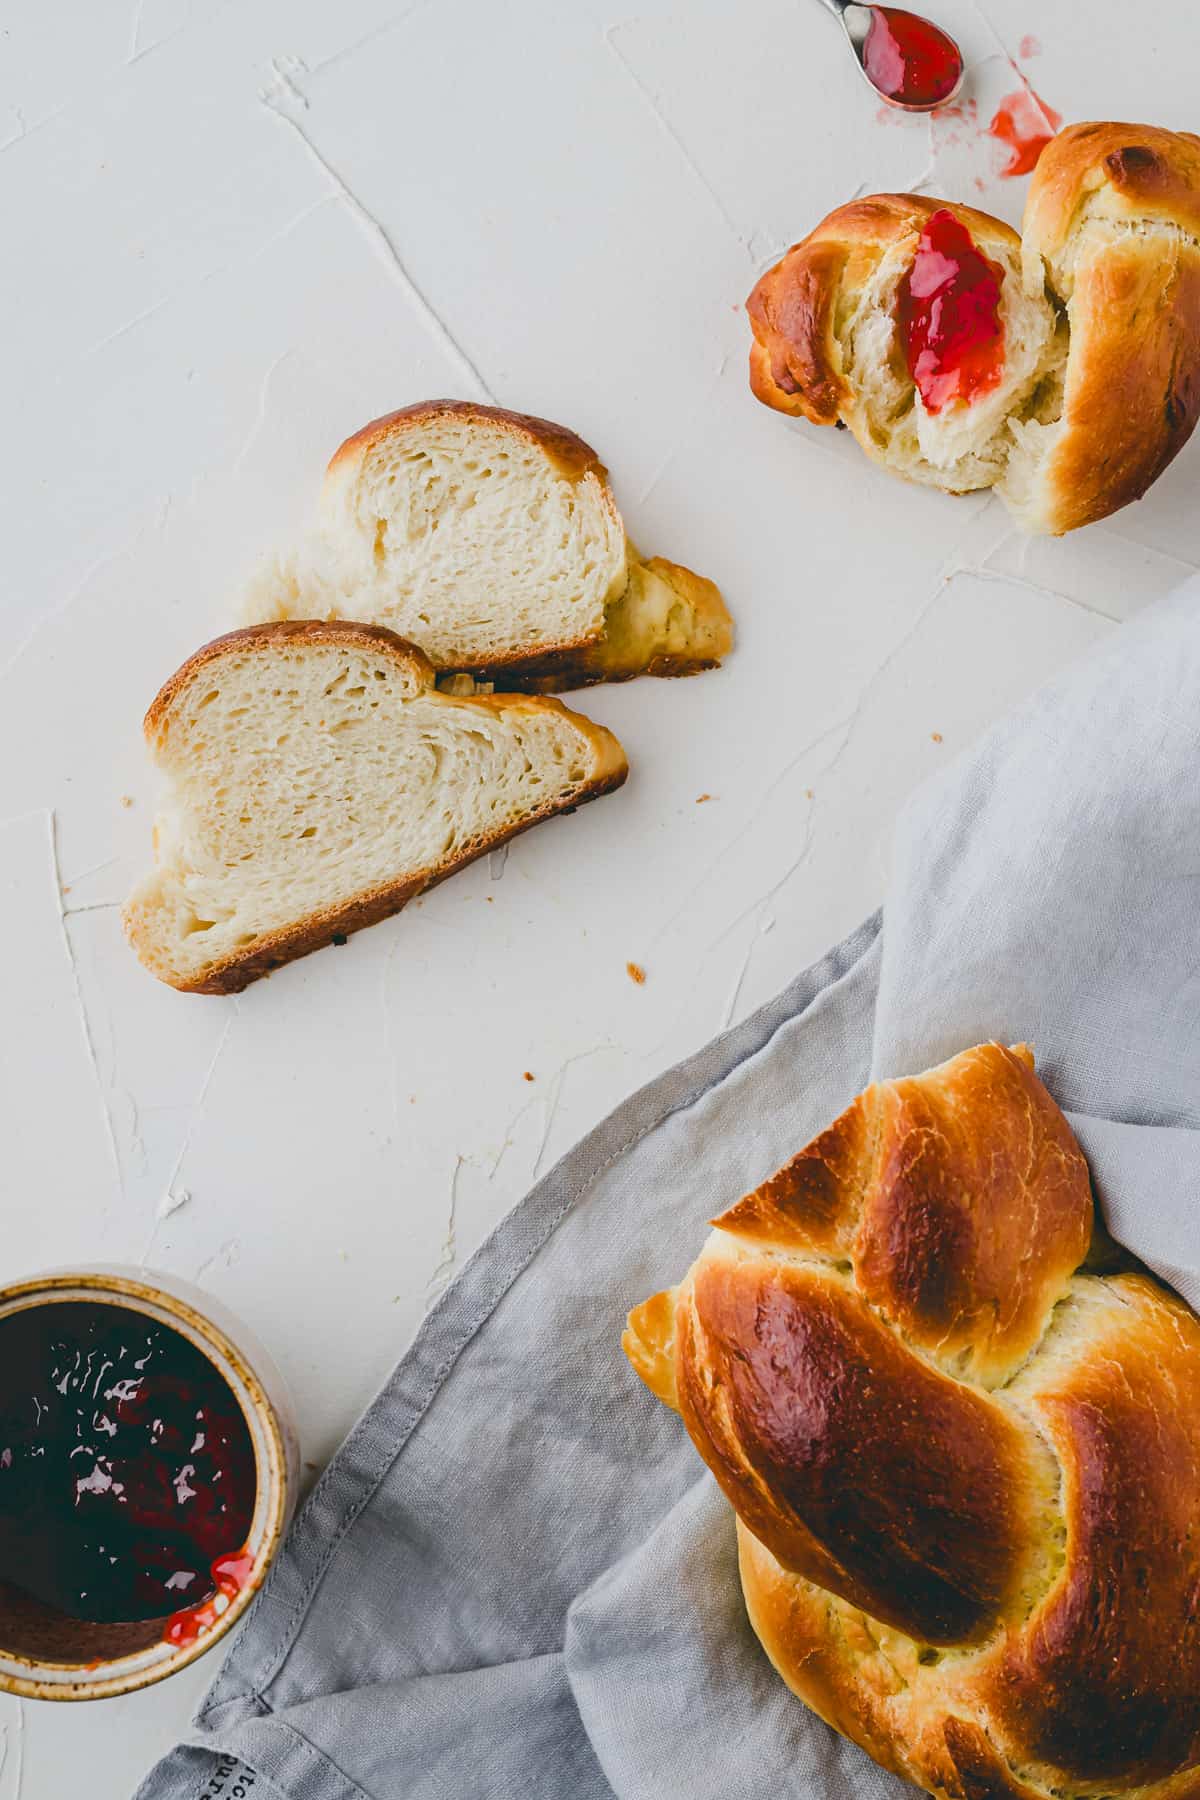 braided bread slices served with jam